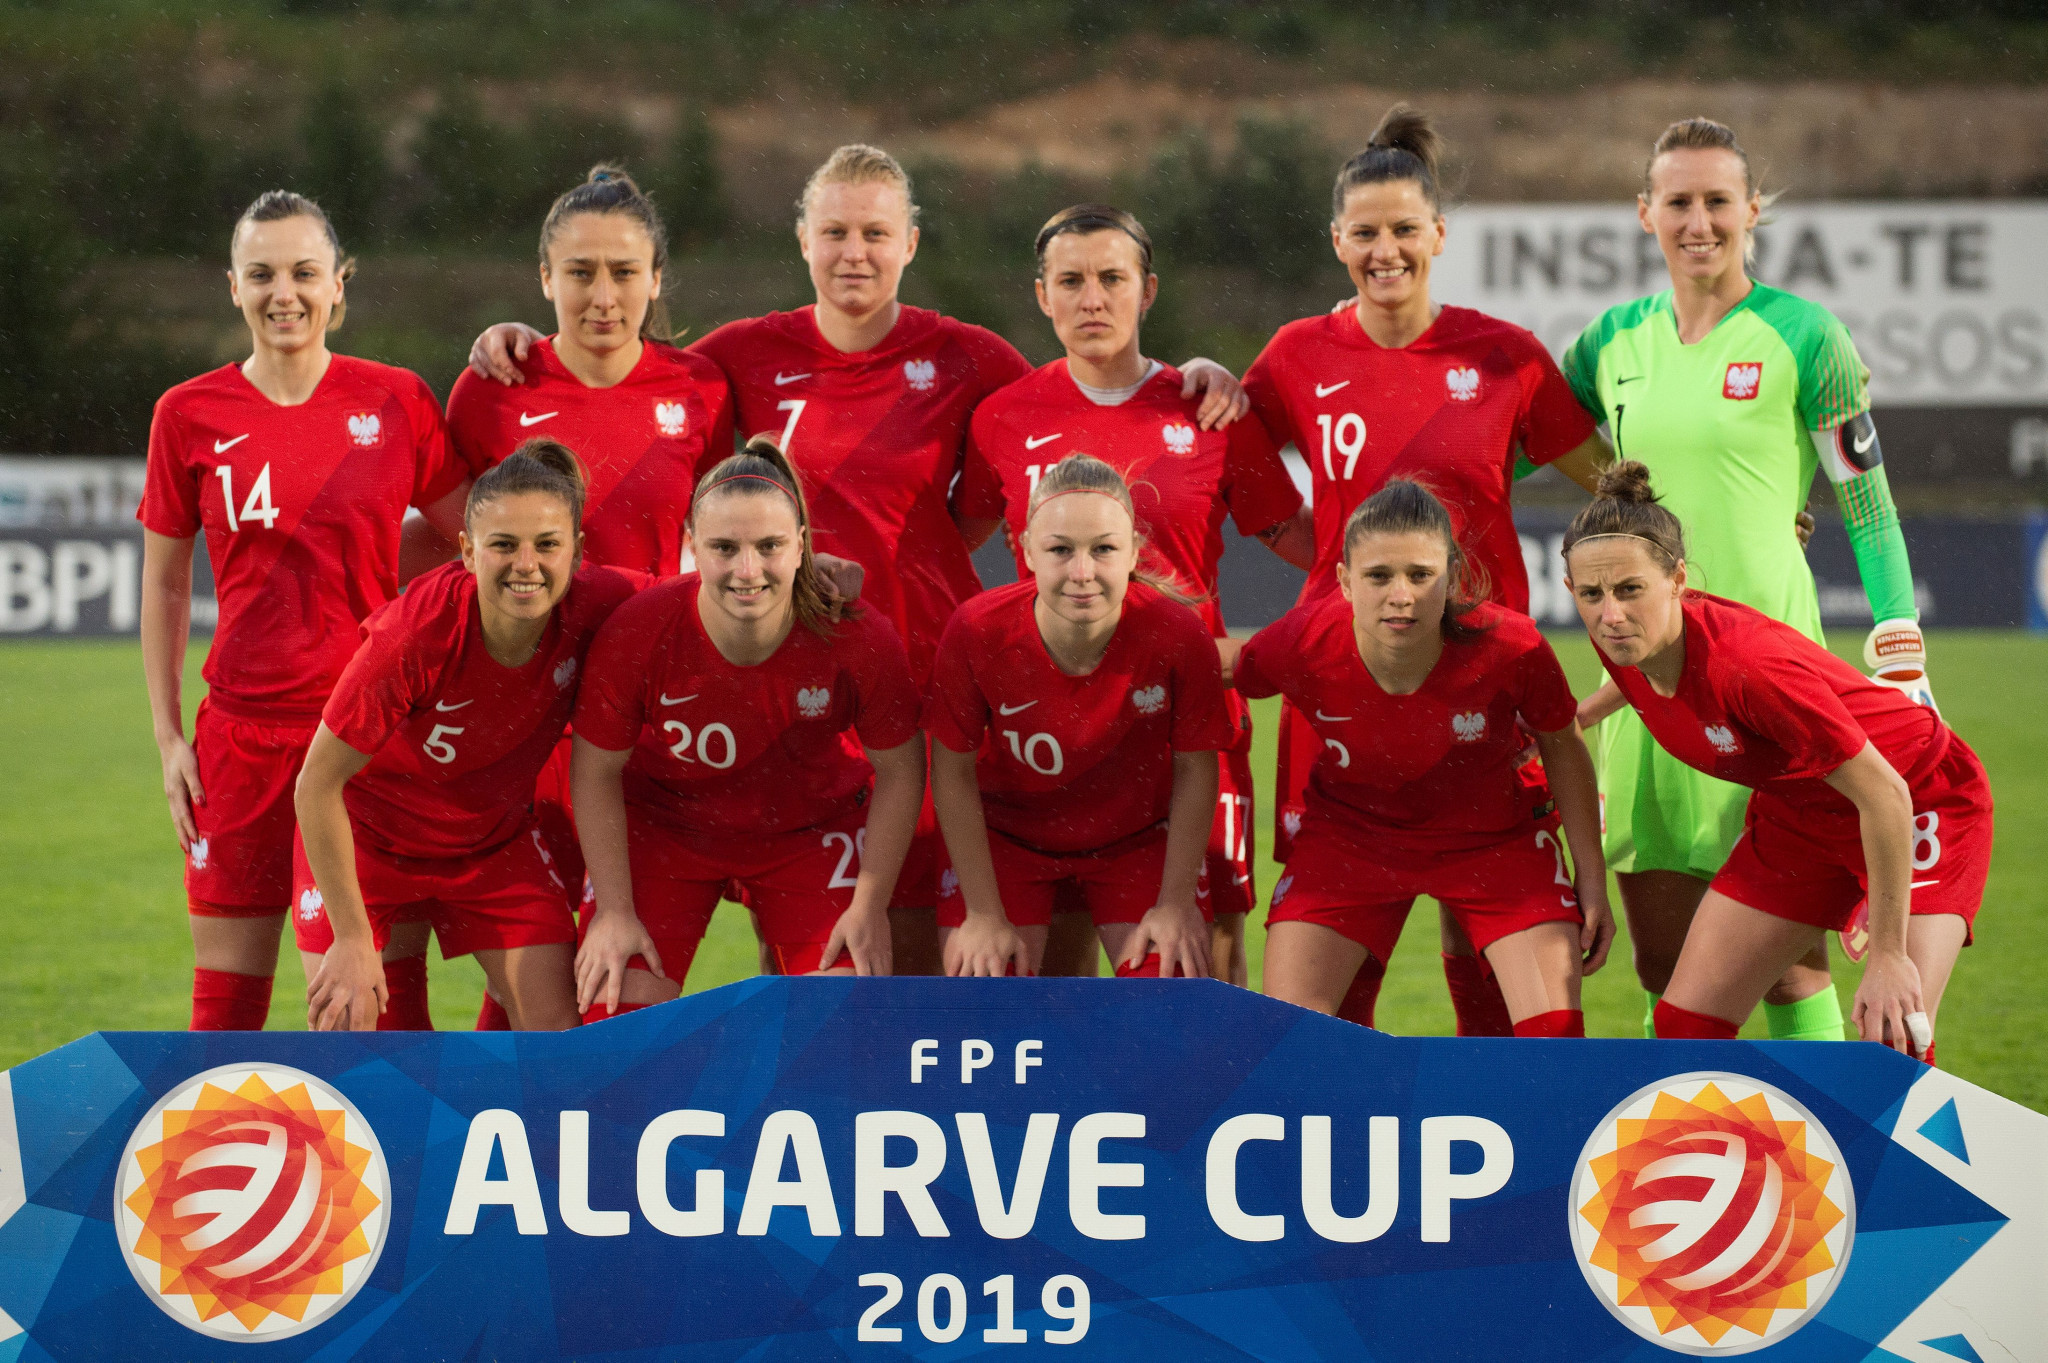 Poland moved up six places to 28th in the FIFA women's world rankings after reaching the final of the Algarve Cup ©Getty Images